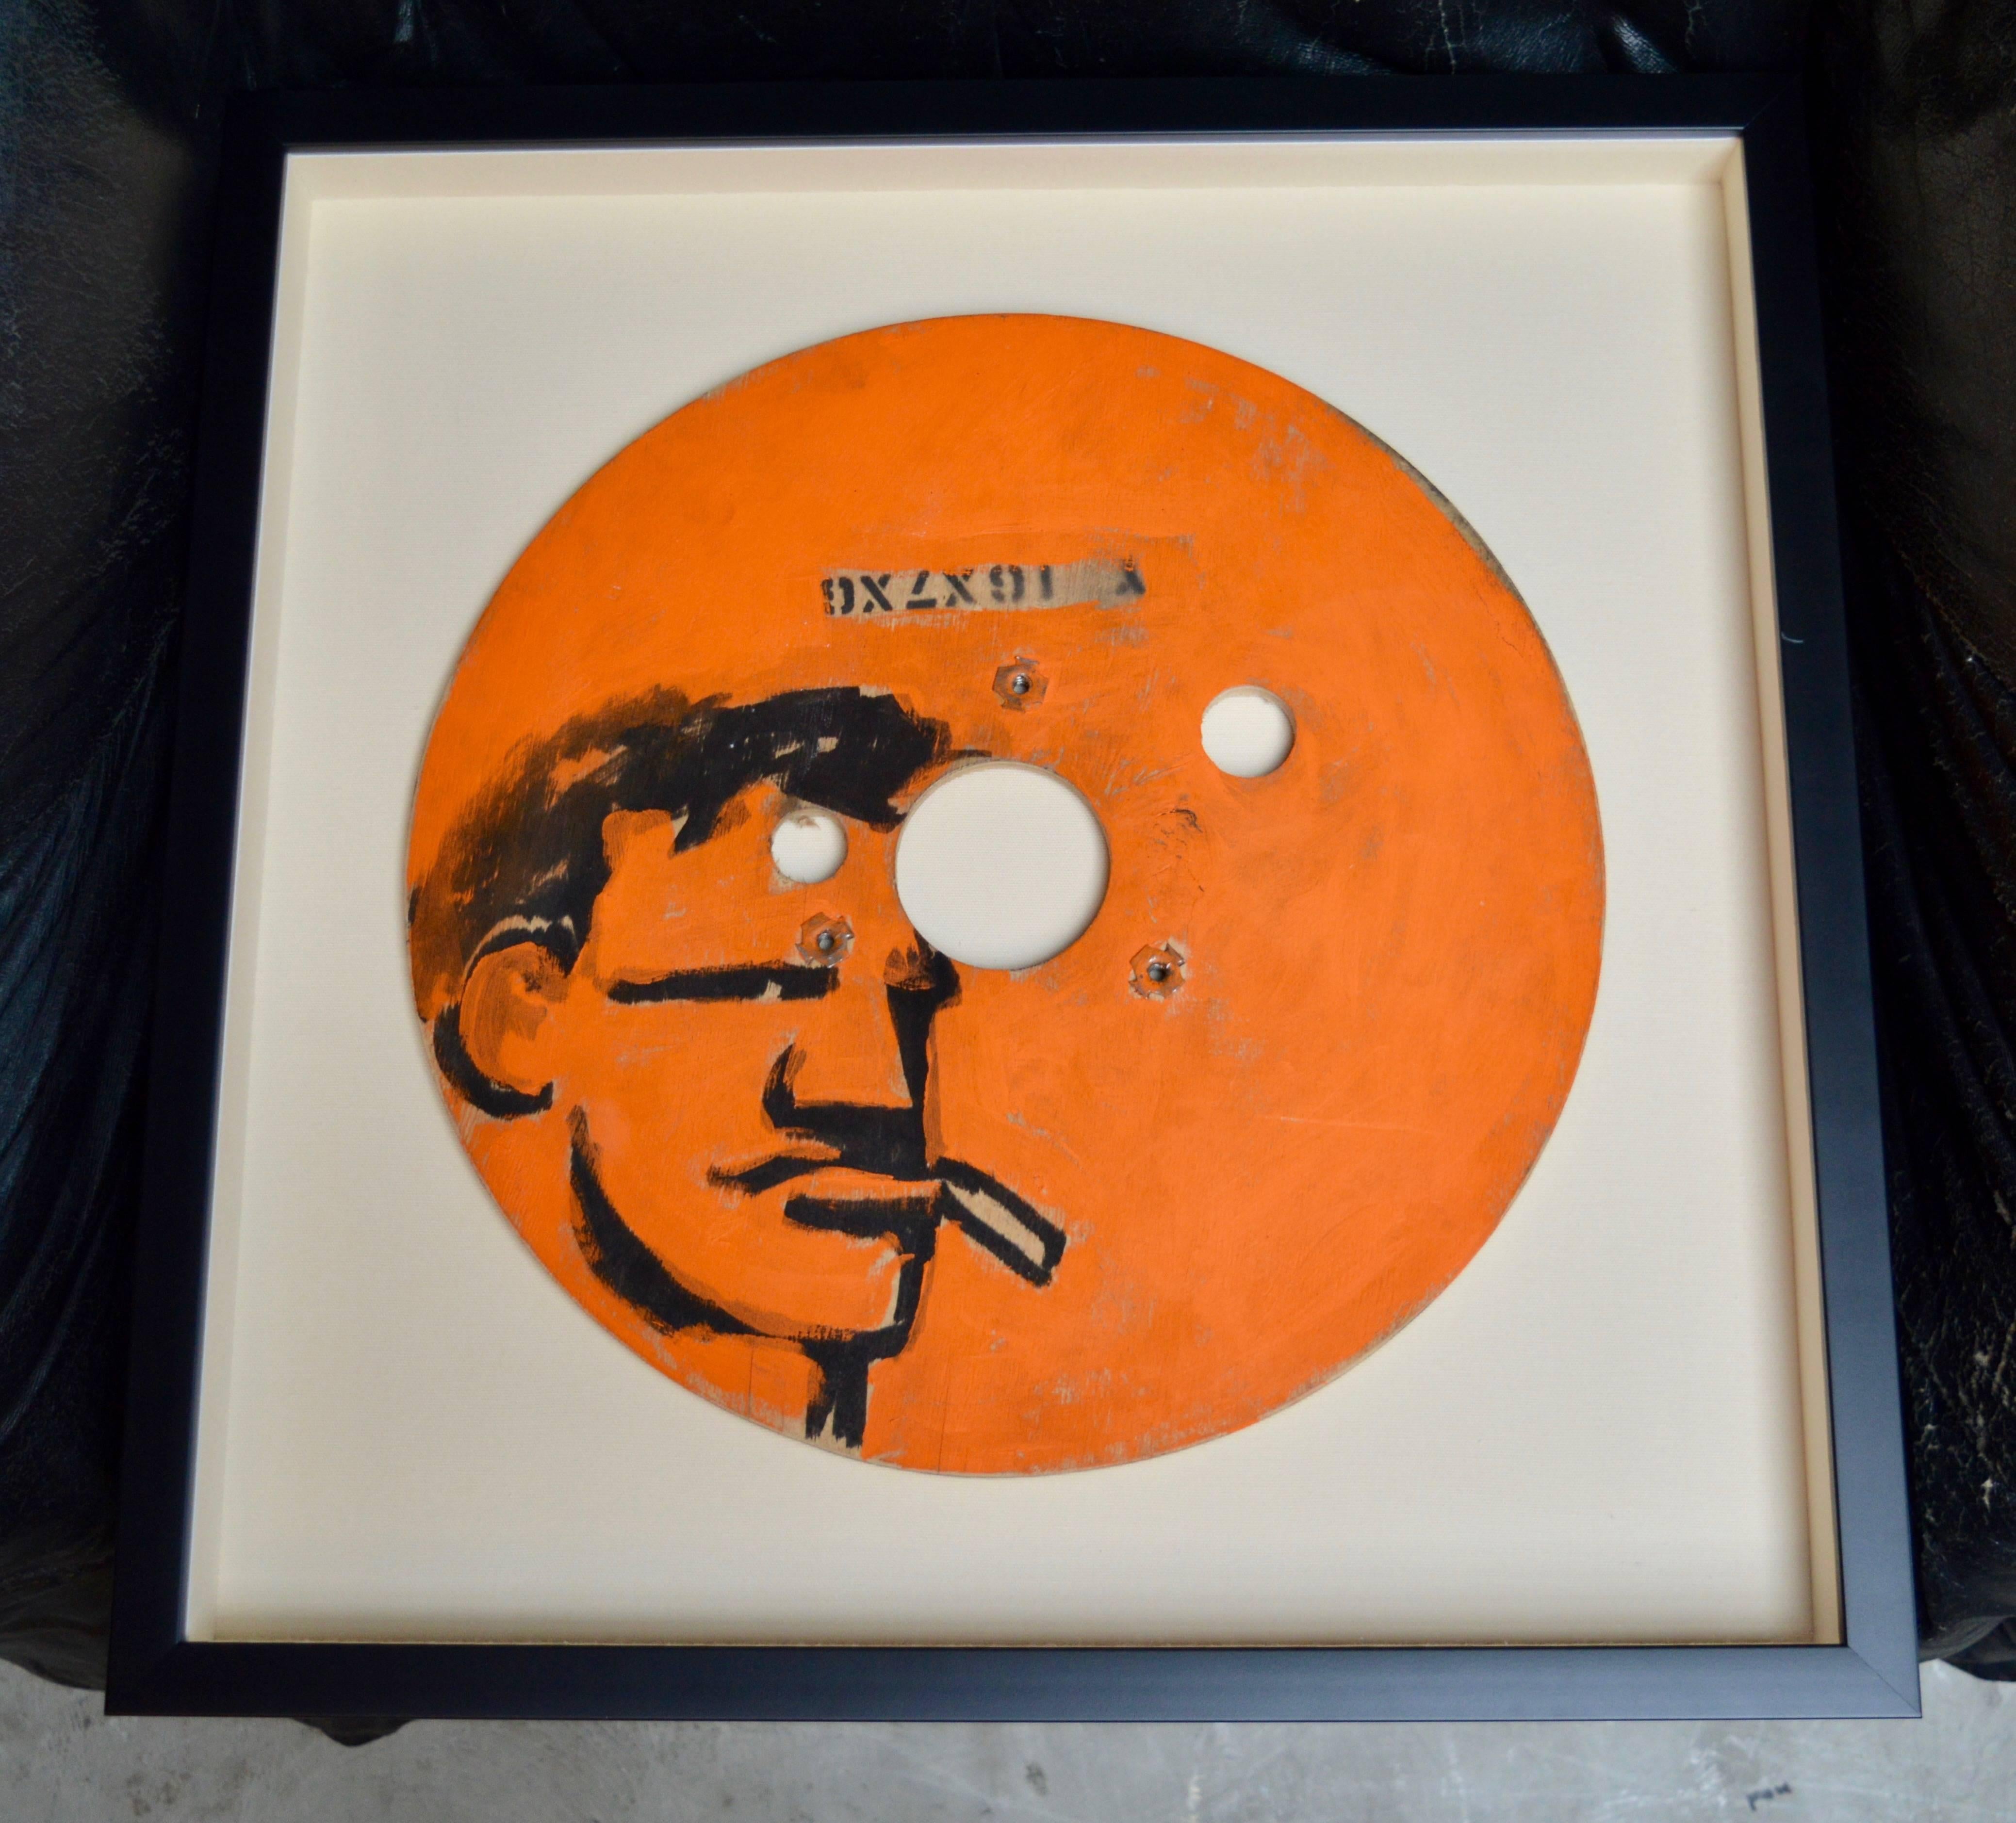 Fantastic original painting by Robert Loughlin on wood disc. Newly framed with UV protective plexiglass. Excellent condition. Comes with certificate of authenticity. 

Multiple Robert Loughlin originals available in separate listings.